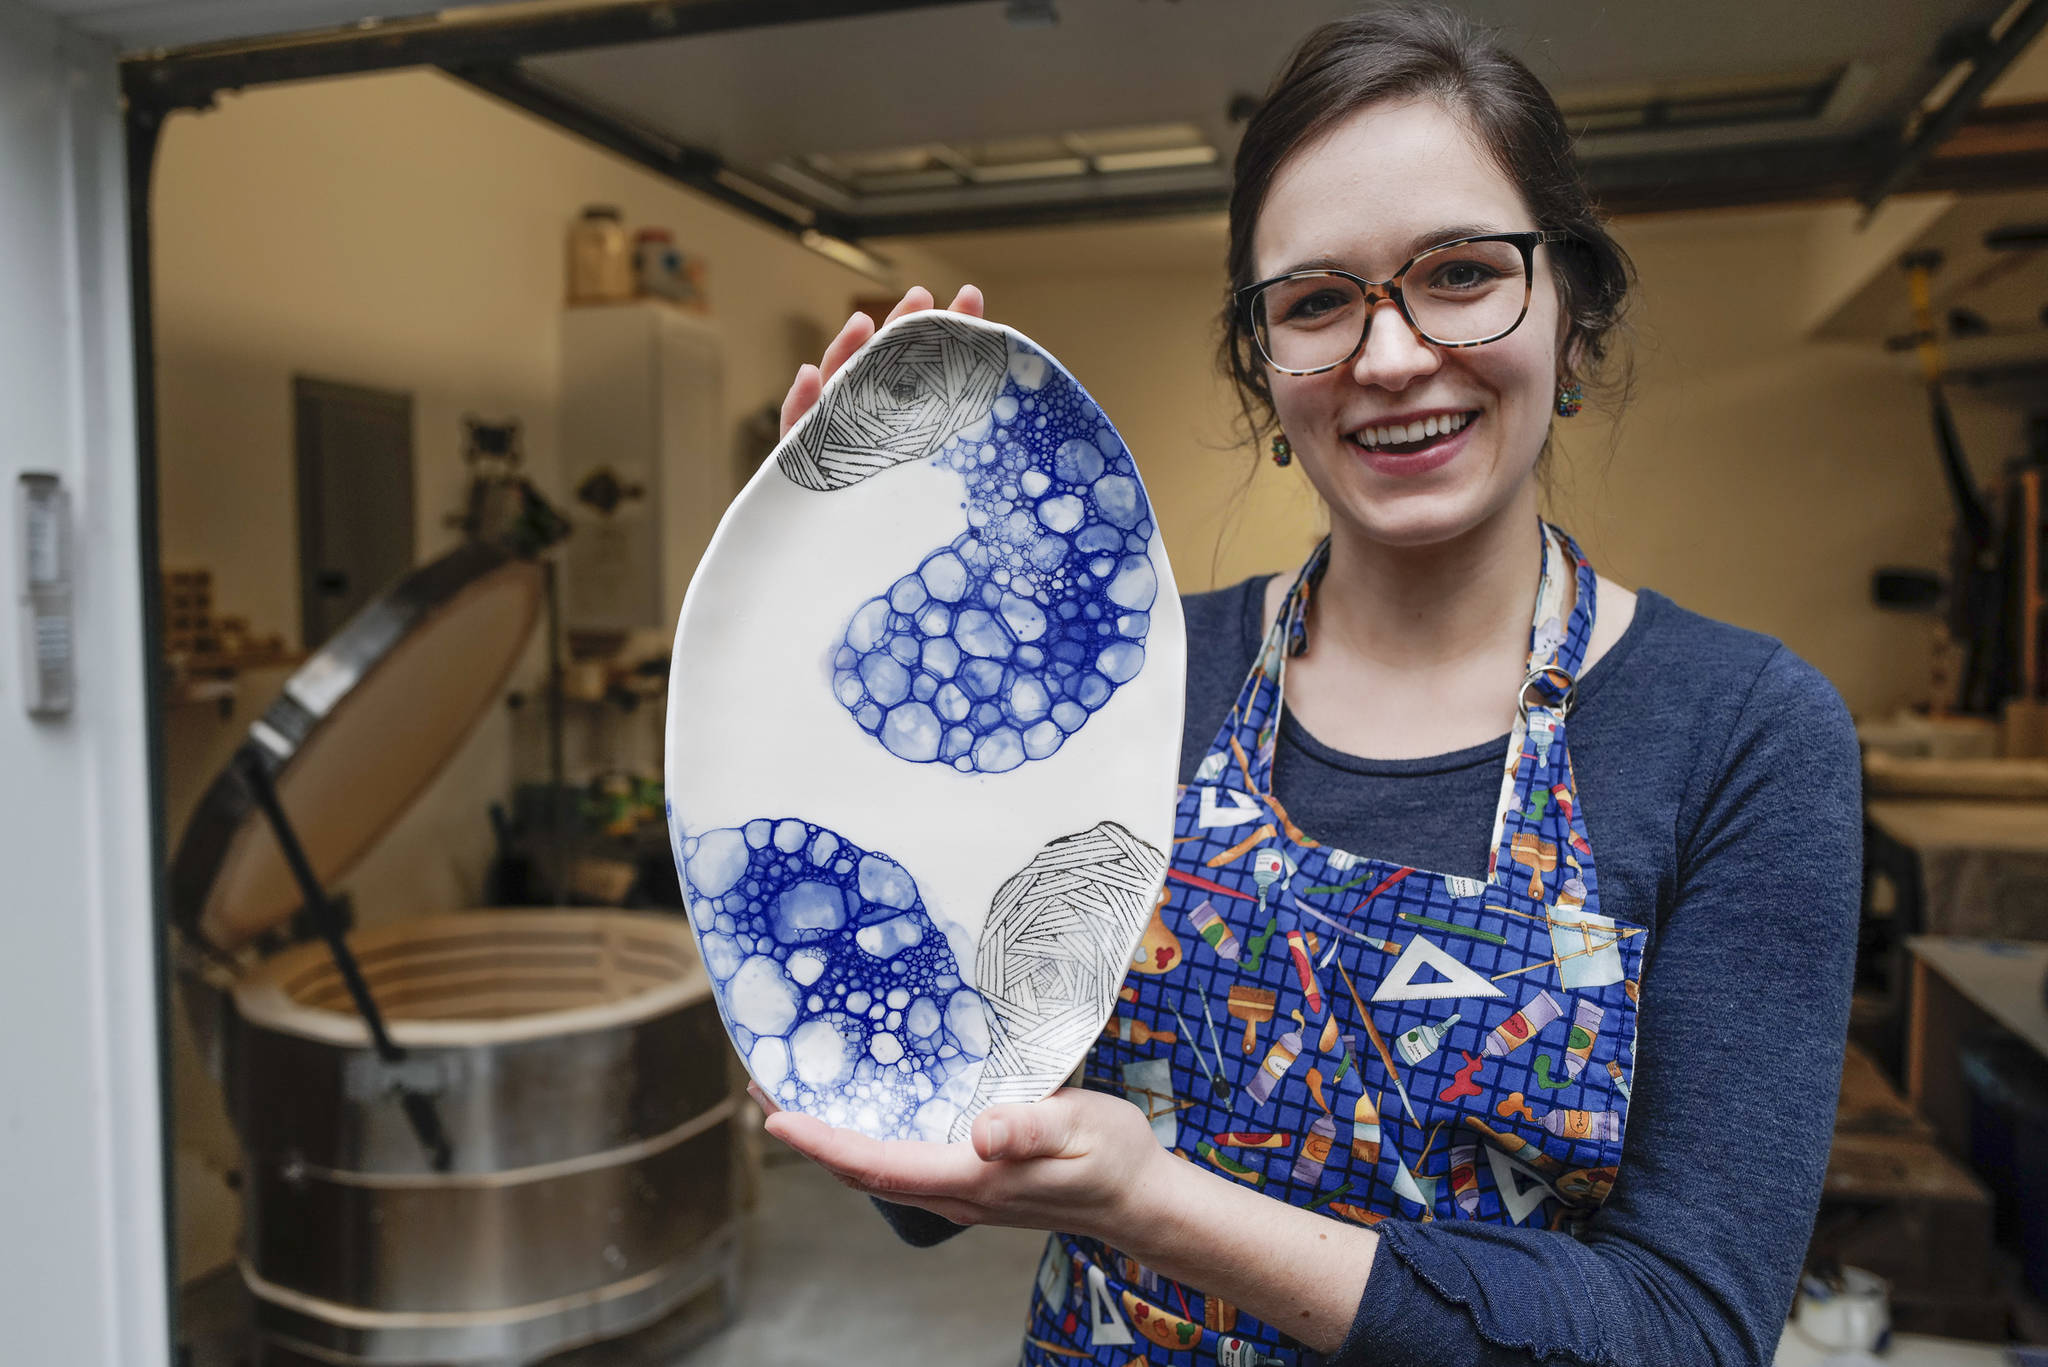 Mercedes Muñoz holds a ceramic plate at her home studio on Monday, Oct. 28, 2019. Muñoz is showing her work at Coppa for First Friday. (Michael Penn | Juneau Empire)